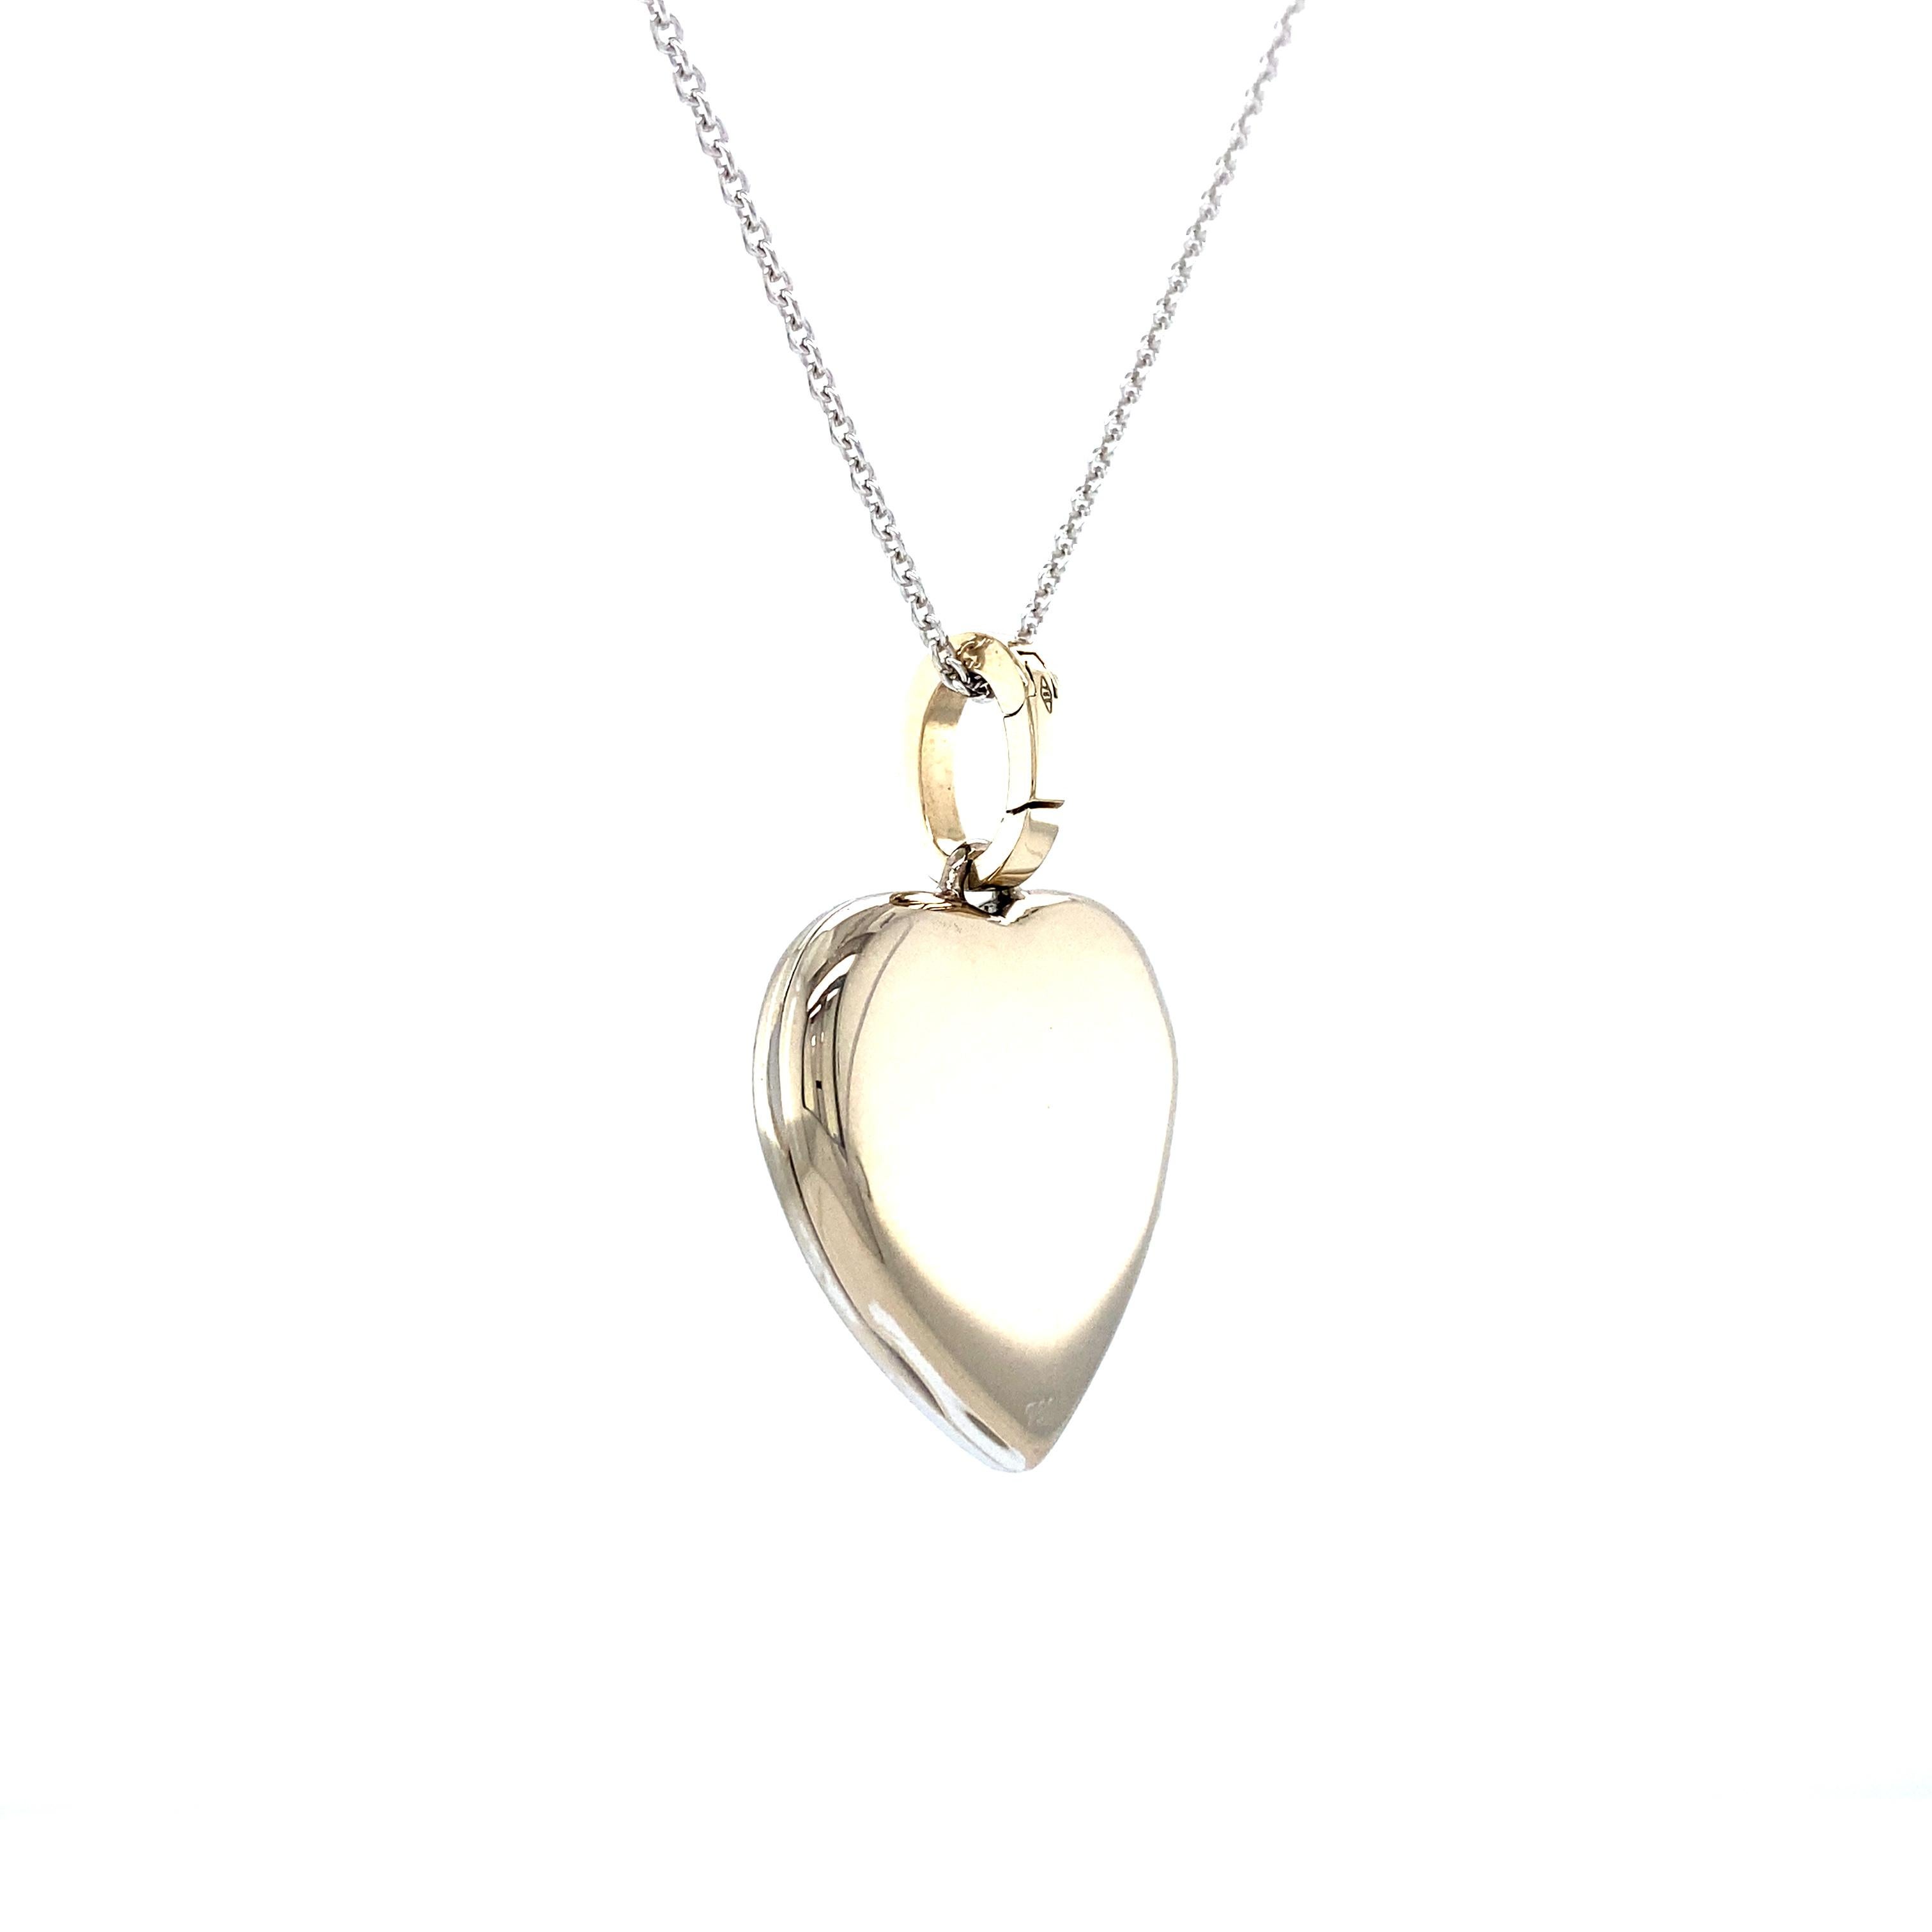 Contemporary Polished Heart Locket Pendant Necklace 18k White Gold 6 Diamonds 0.09 ct H VS For Sale